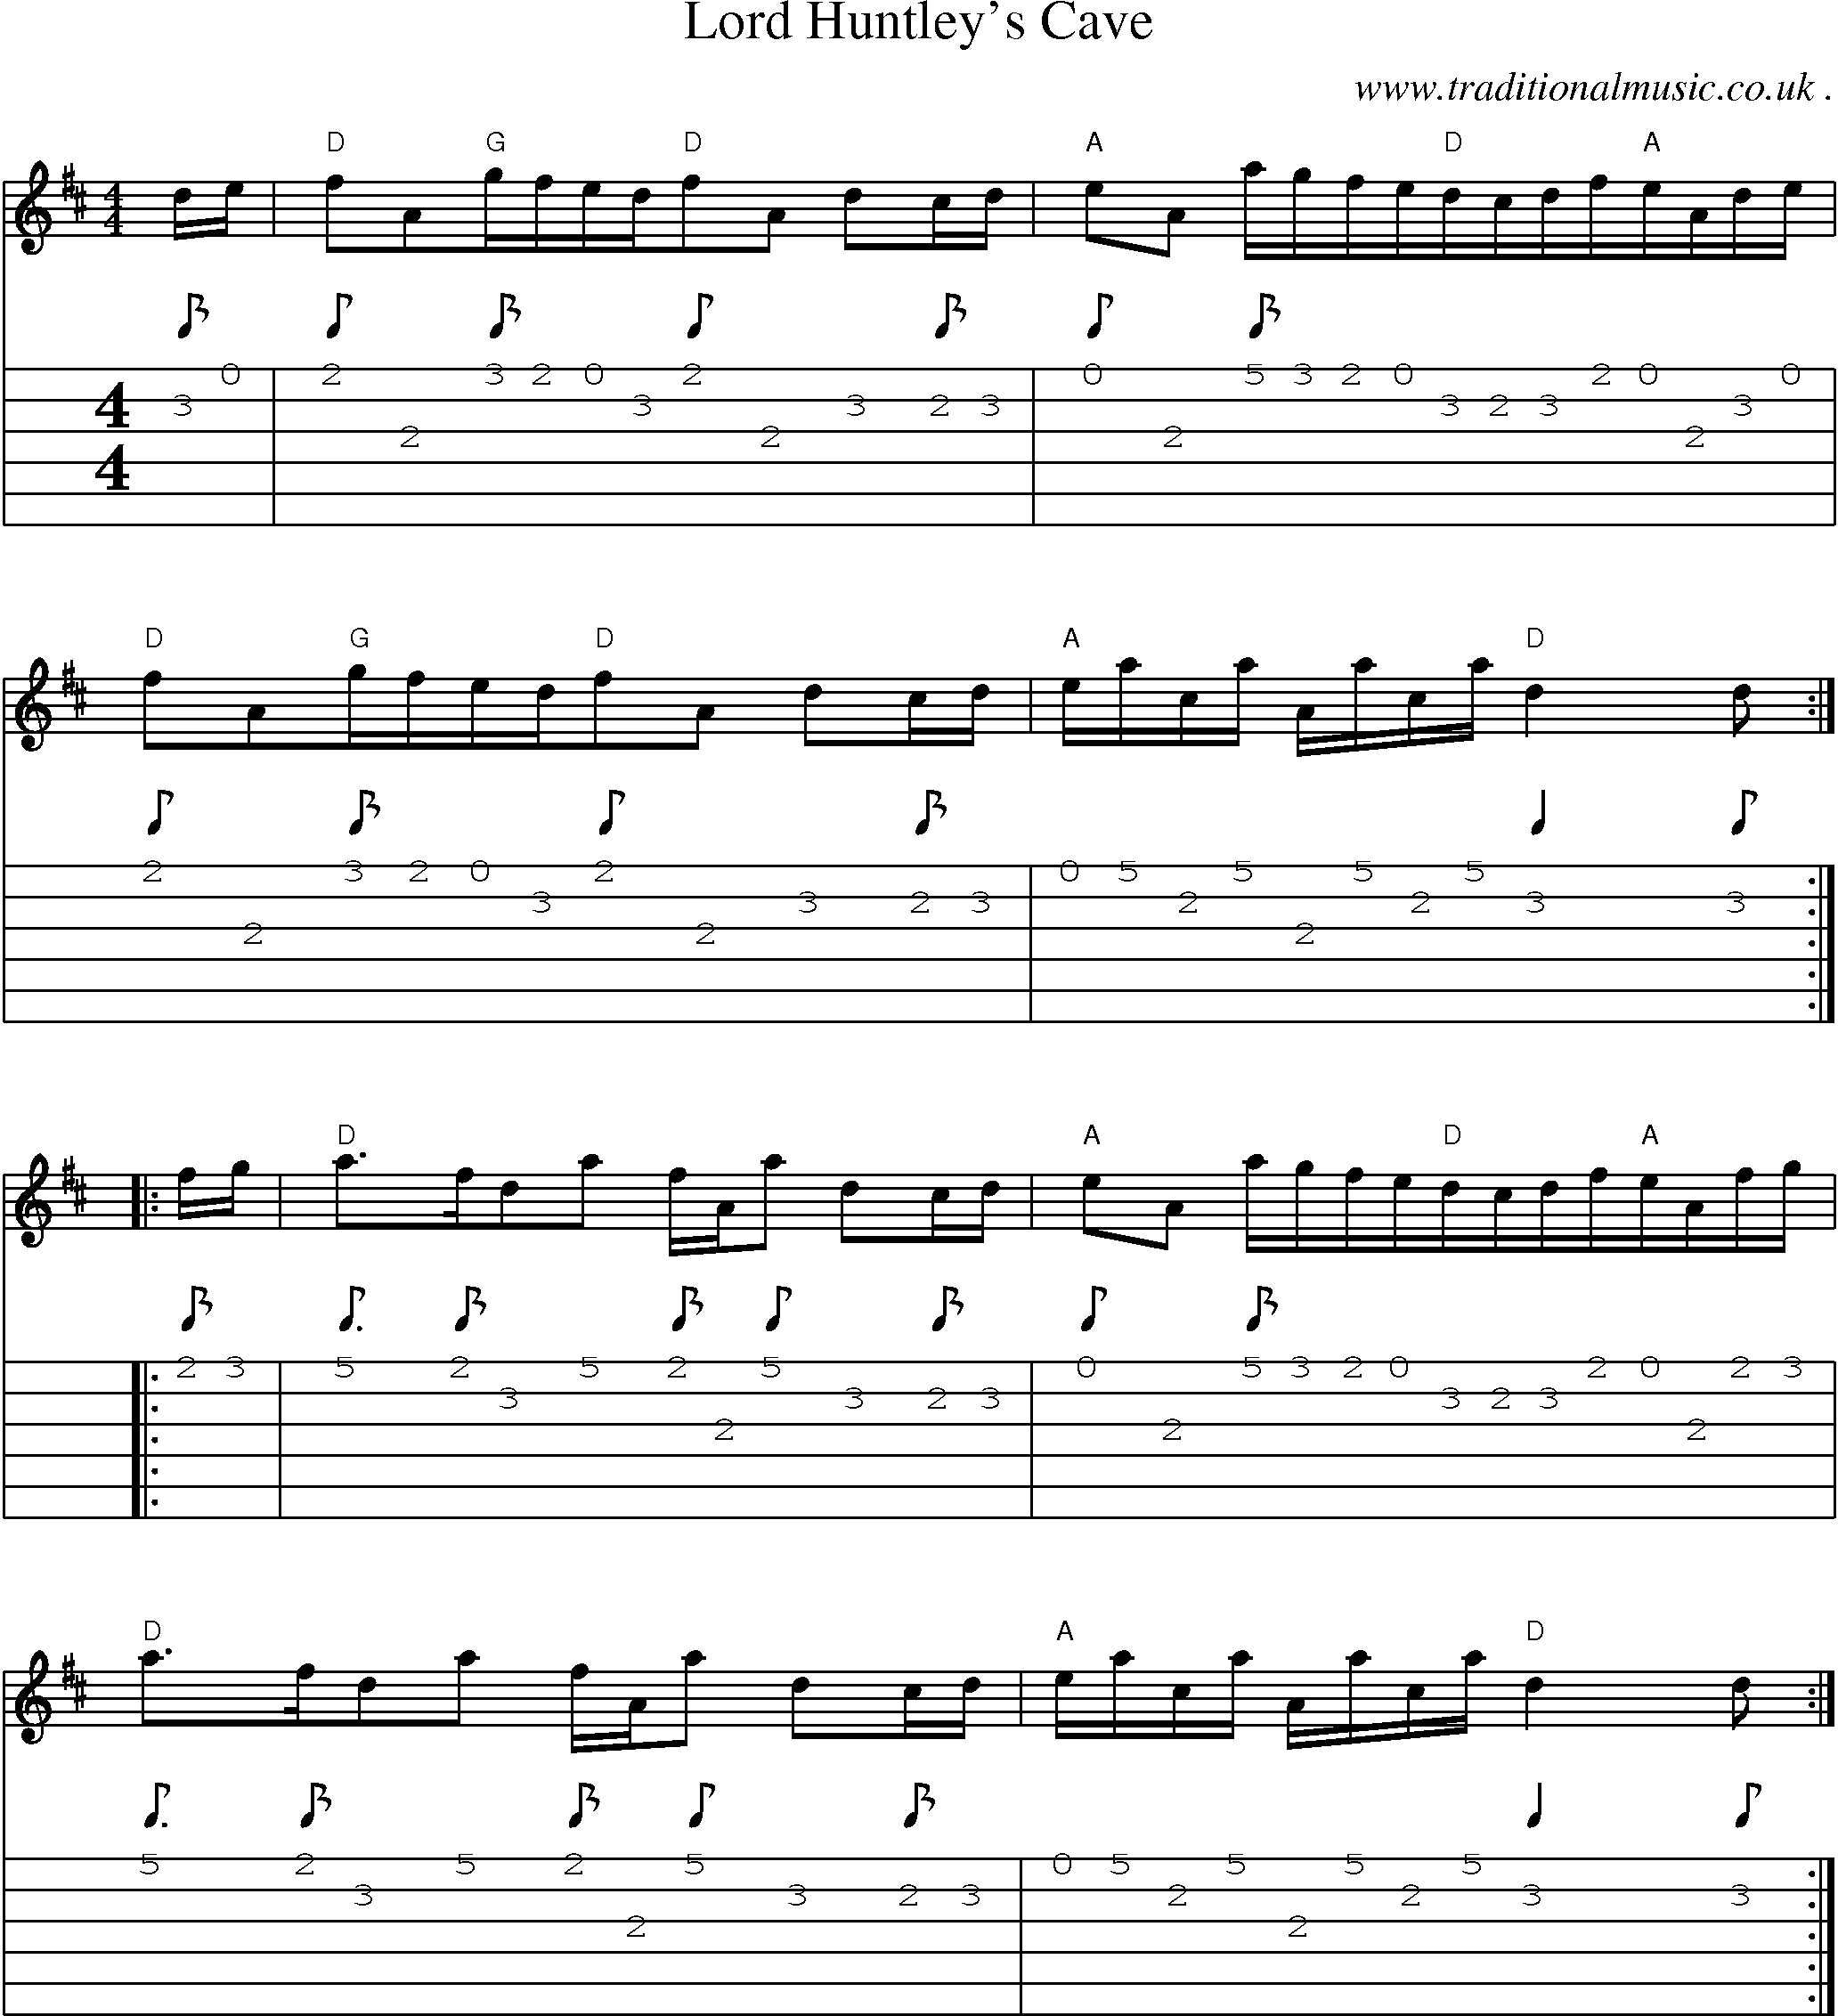 Sheet-Music and Guitar Tabs for Lord Huntleys Cave